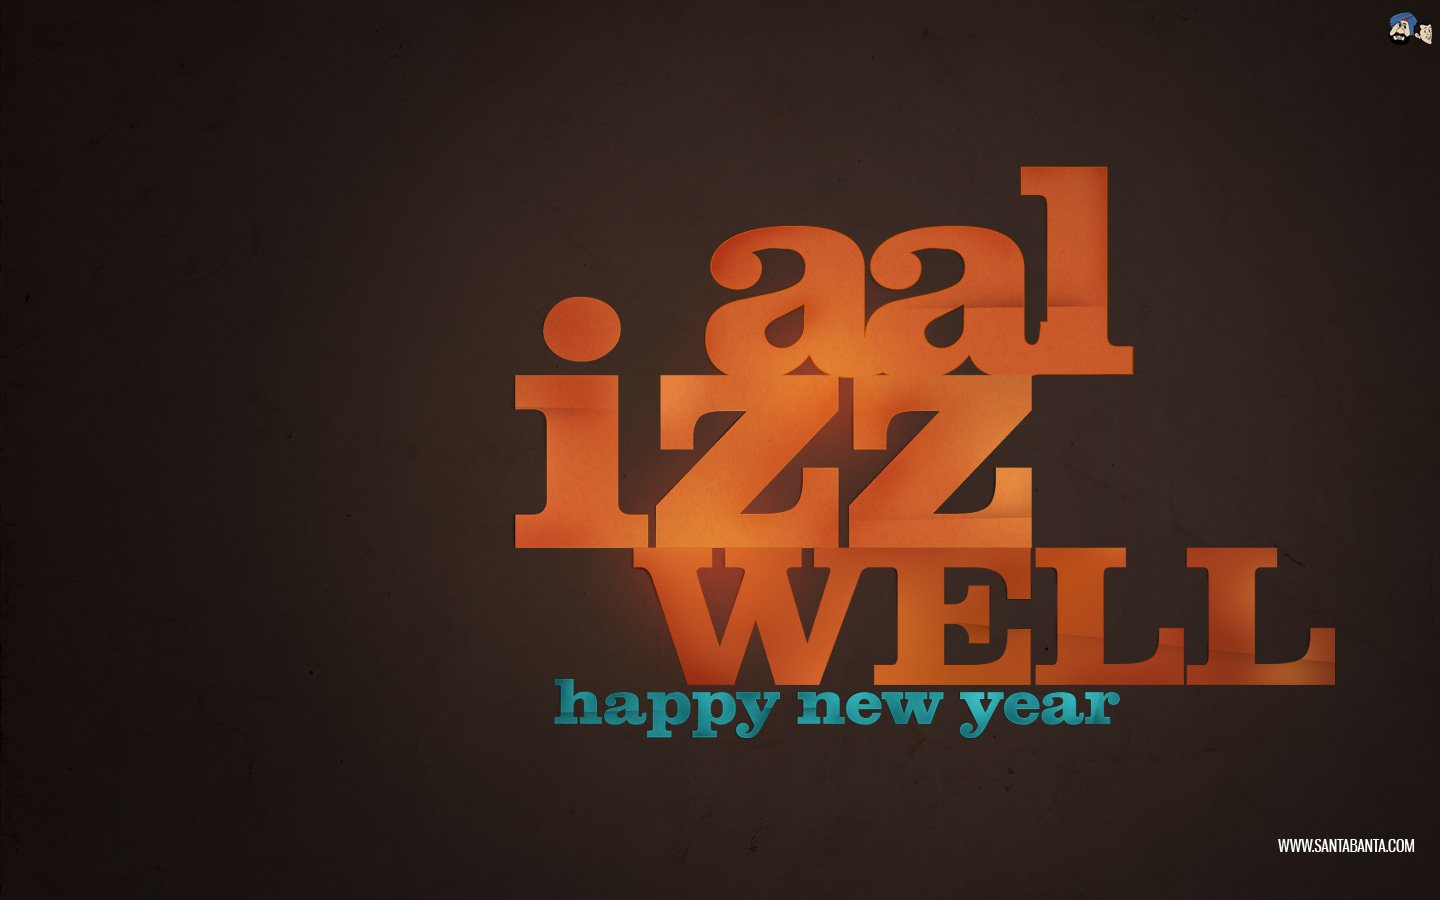 New Year 2011 wallpapers 2